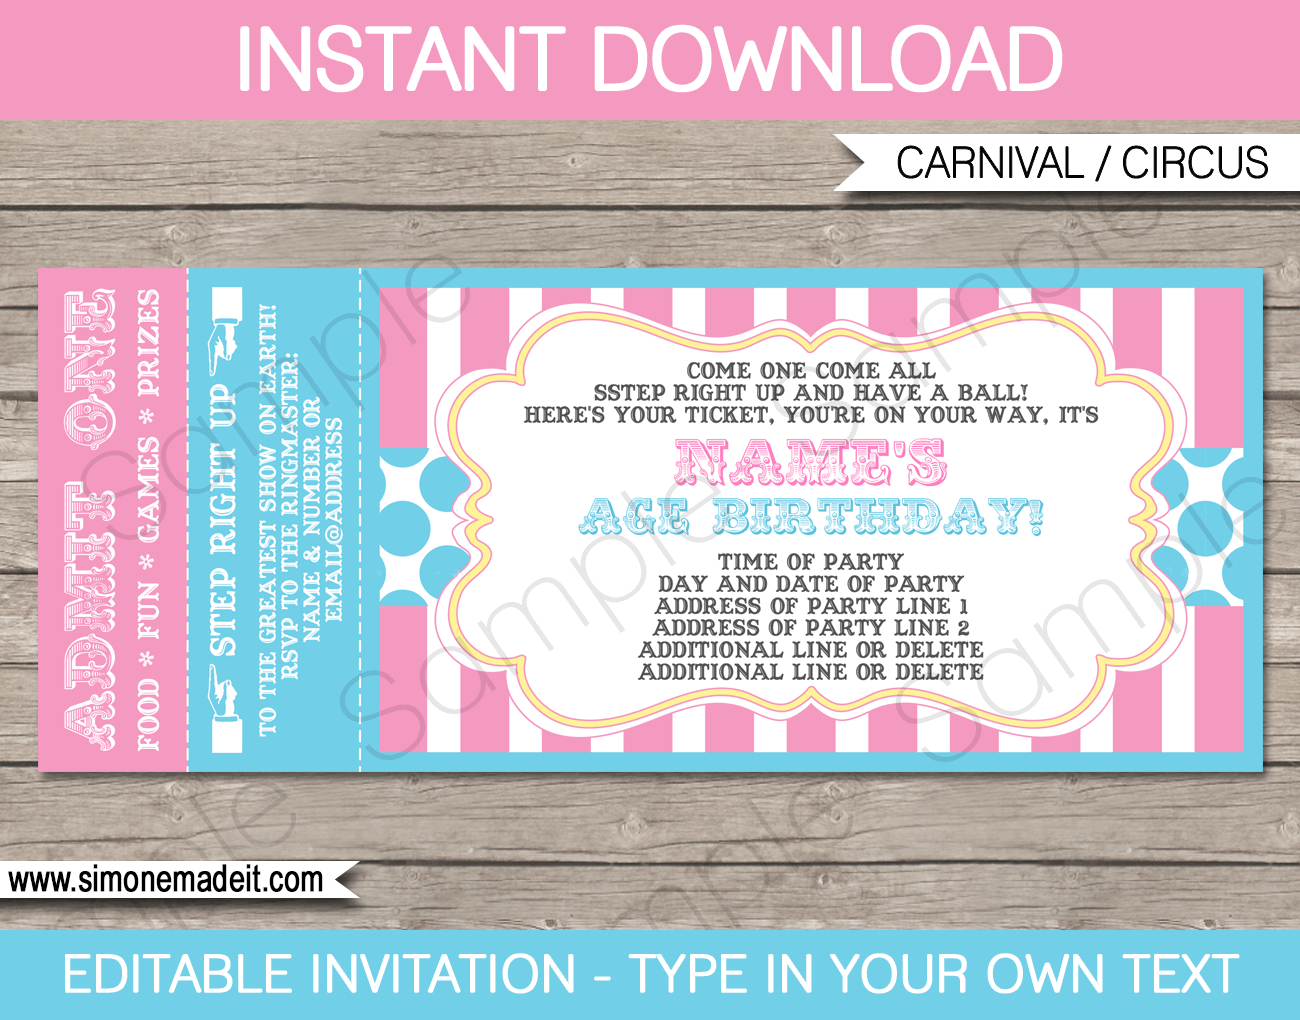 Carnival Ticket Invitations Template Carnival Circus Pink Aqua throughout size 1300 X 1020